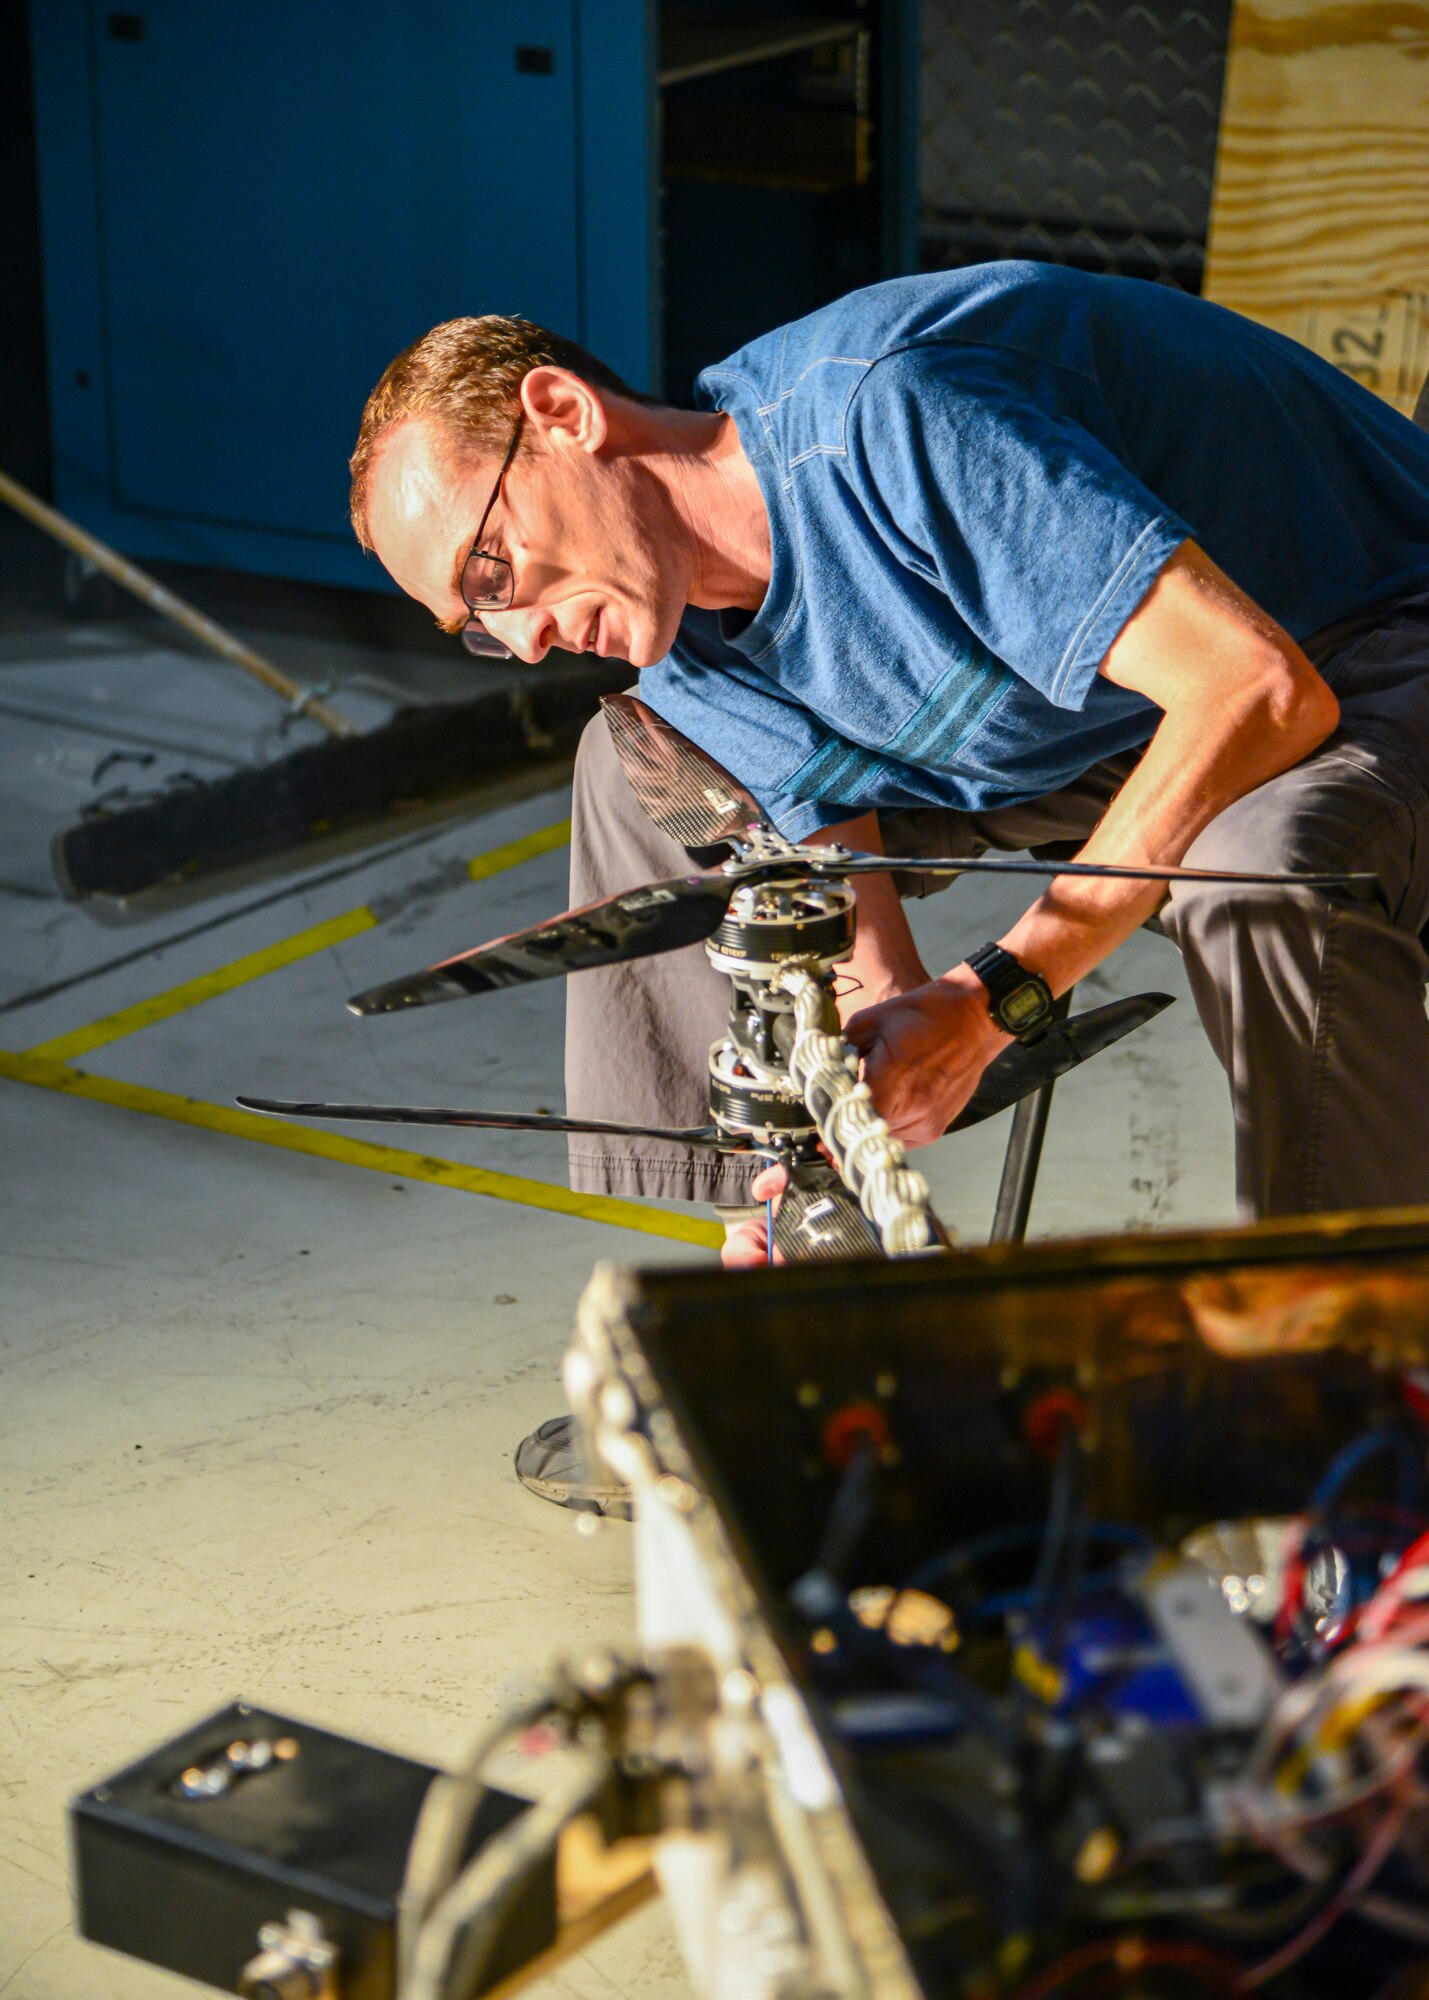 Aleksandr Yarovinskiy works on the body of his unmanned aircraft system in a work area just outside the main chamber of the Benefield Anechoic Facility. Yarovinskiy has secured funding from SparkED, the 412th Test Wing’s innovation team, to design, build, test and deliver a drone that has the potential to expand and enhance the BAF’s data-capture capabilities. (Air Force photo by Gary Hatch)